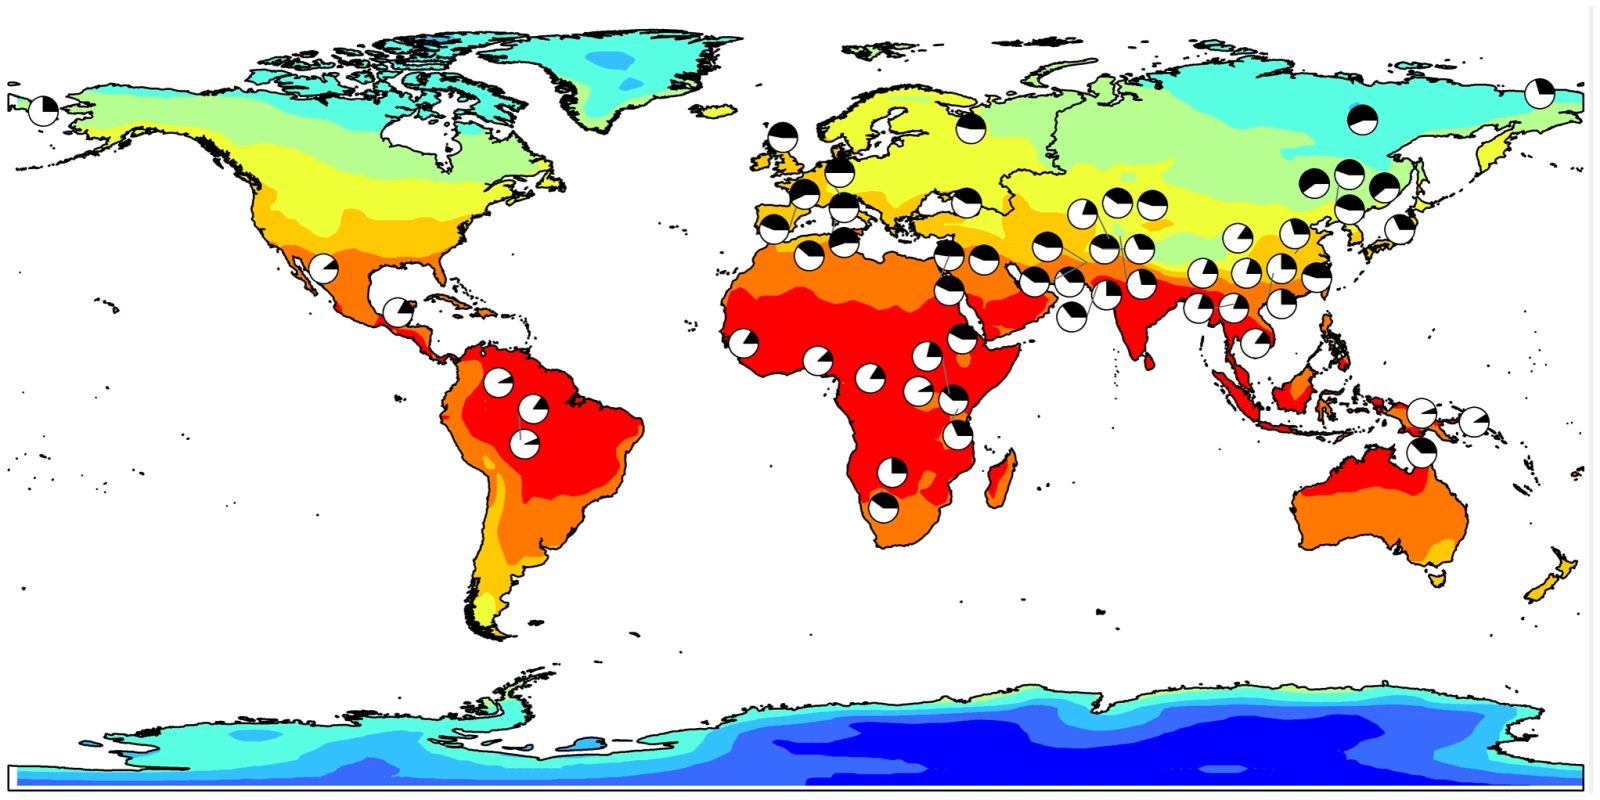 Allele frequency for rs11868112 (ancestral and derived alleles are shown in white and black, respectively) in HGDP populations mapped onto a GIS map of Winter maximum temperature.